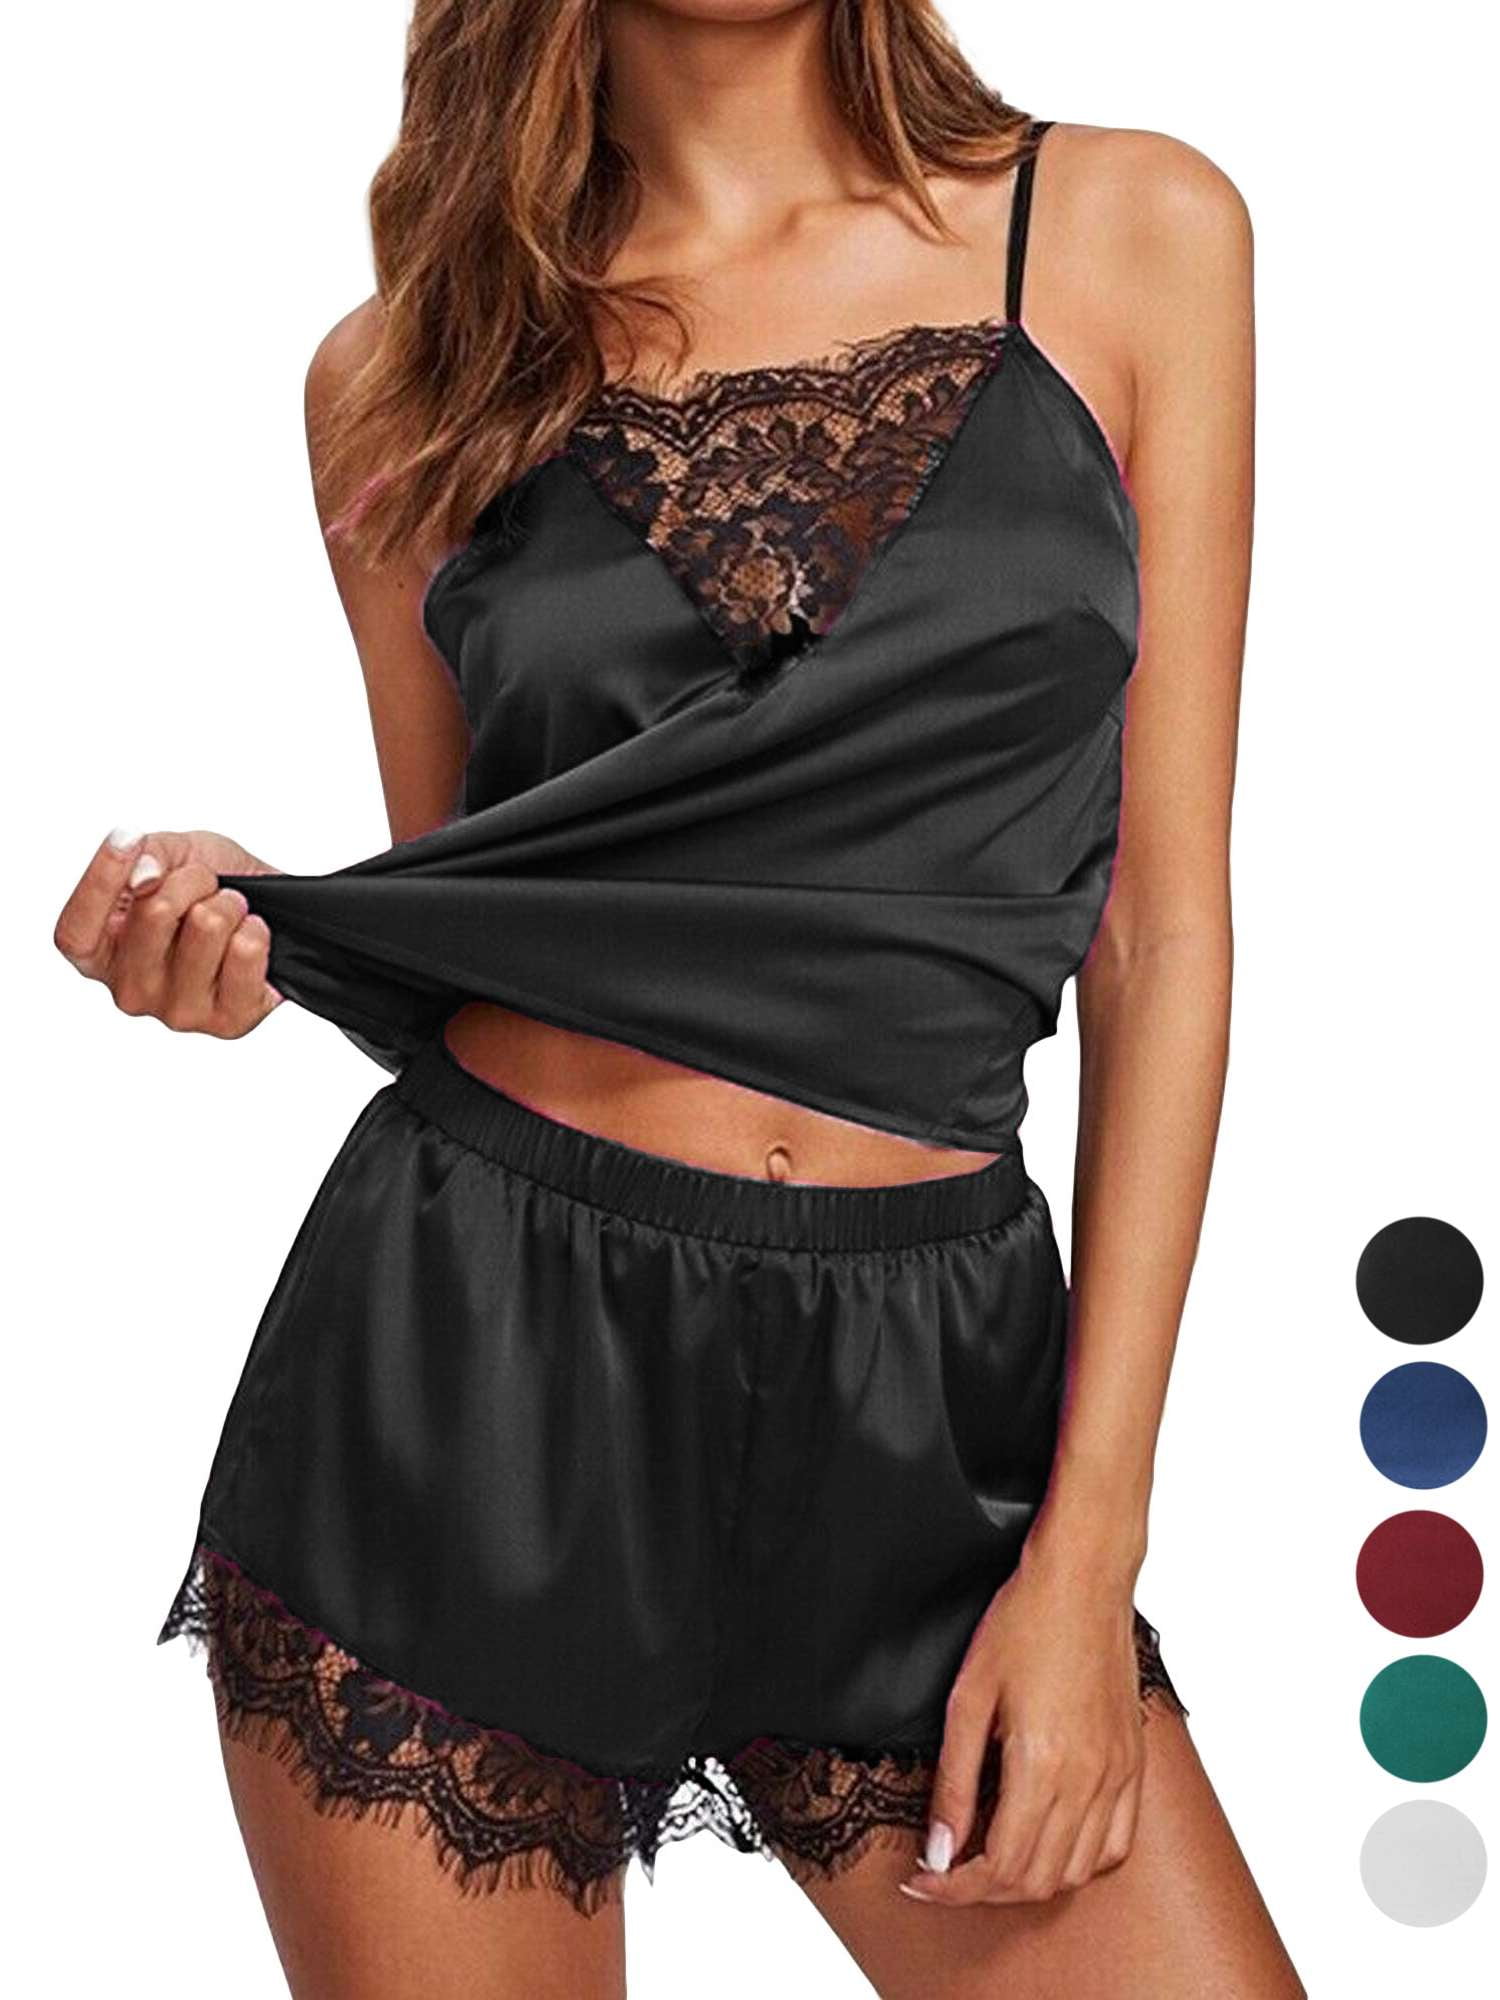 Pijama Sexy Camis Lingerie Sexy Shapewear Corset Women Lace Perspective  Lace Girdles Colombia De $56,78